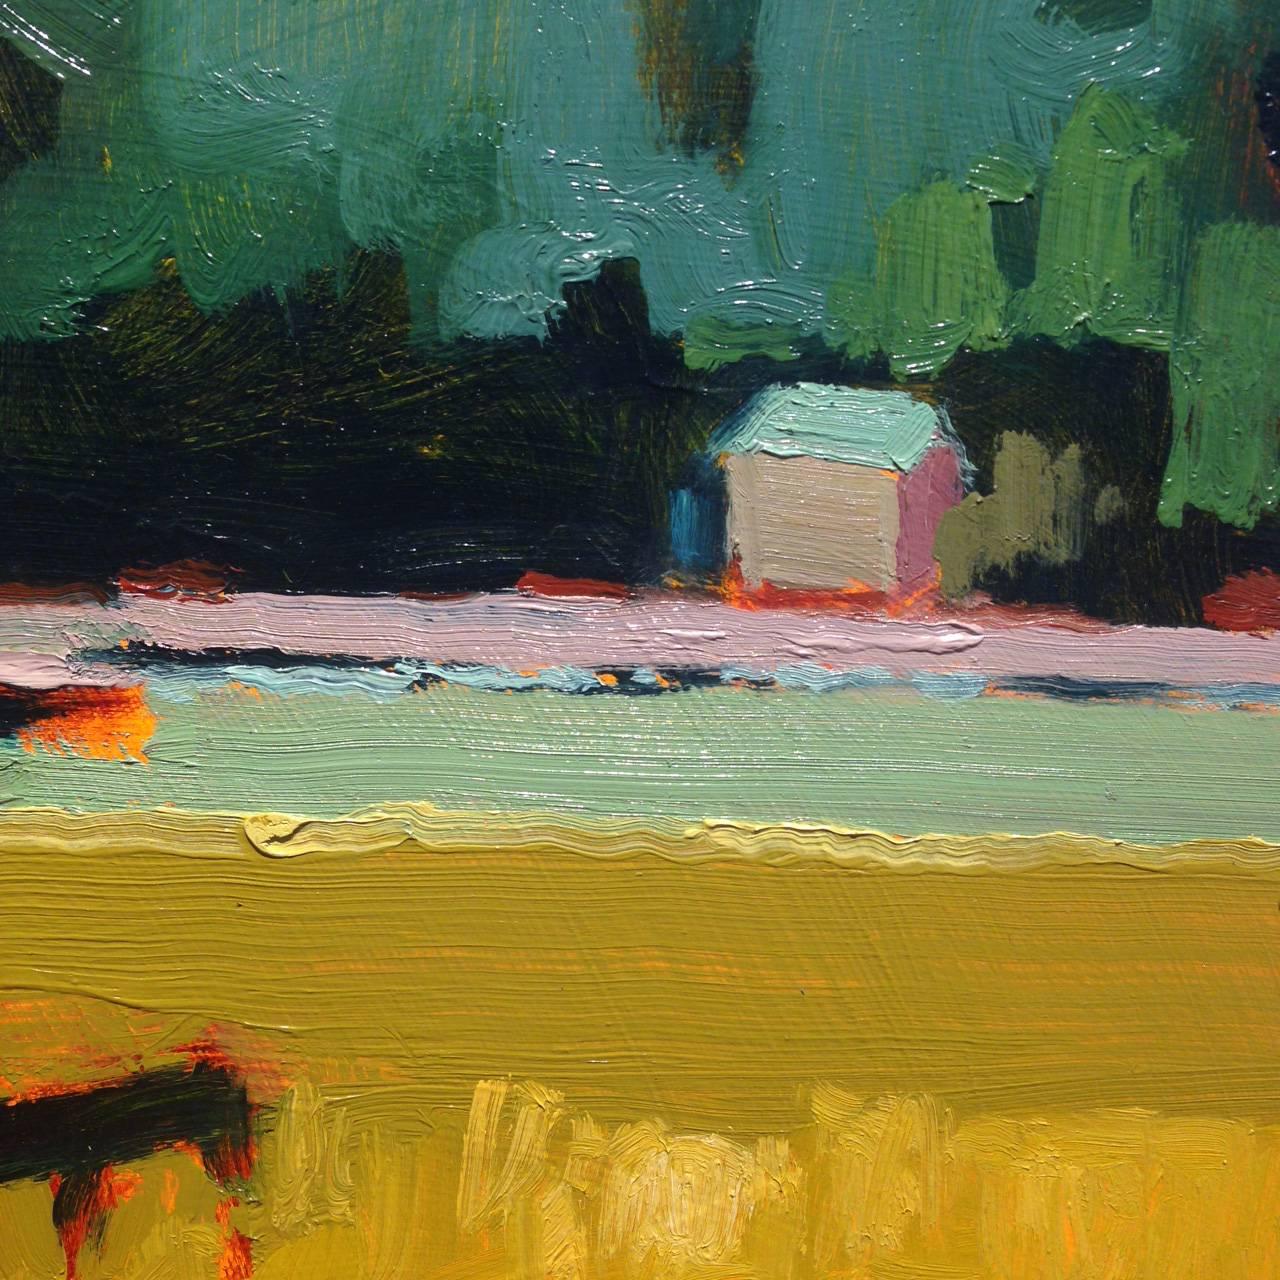 Vinalhaven #20 - Abstract Painting by Jane Schmidt